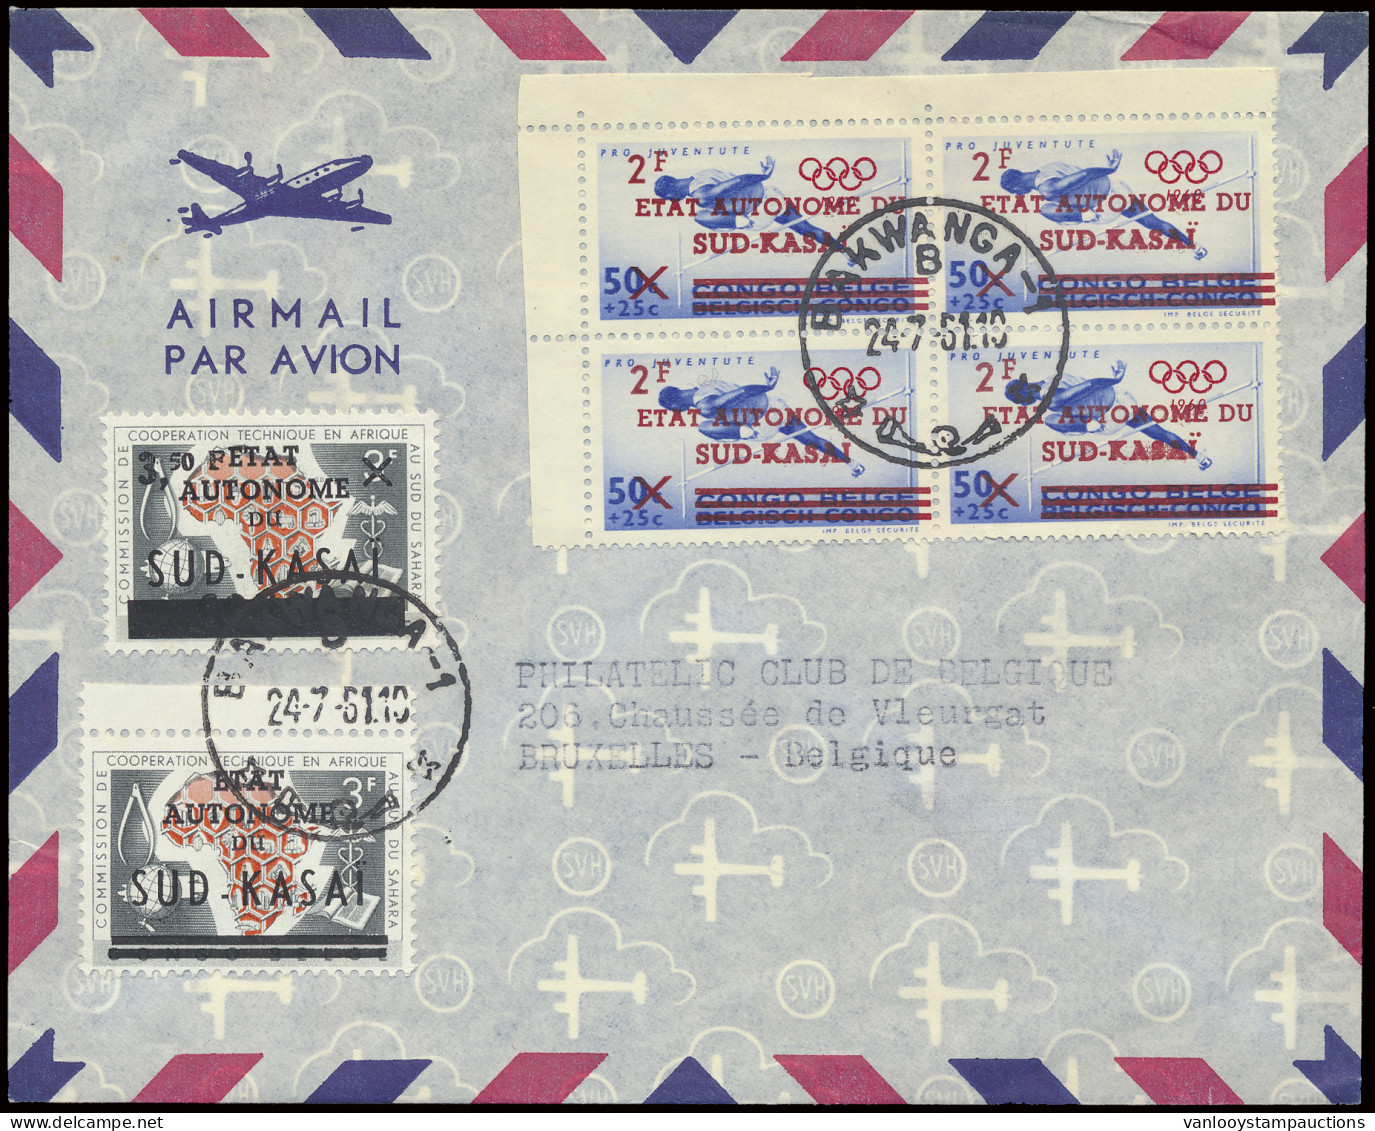 1961 Philatelic Club De Belgique Cover Franked With OBP N° 14/15 And 18 (bloc Of 4 With Corner Of Sheet) 3,50Fr. On 3Fr  - Sud-Kasaï